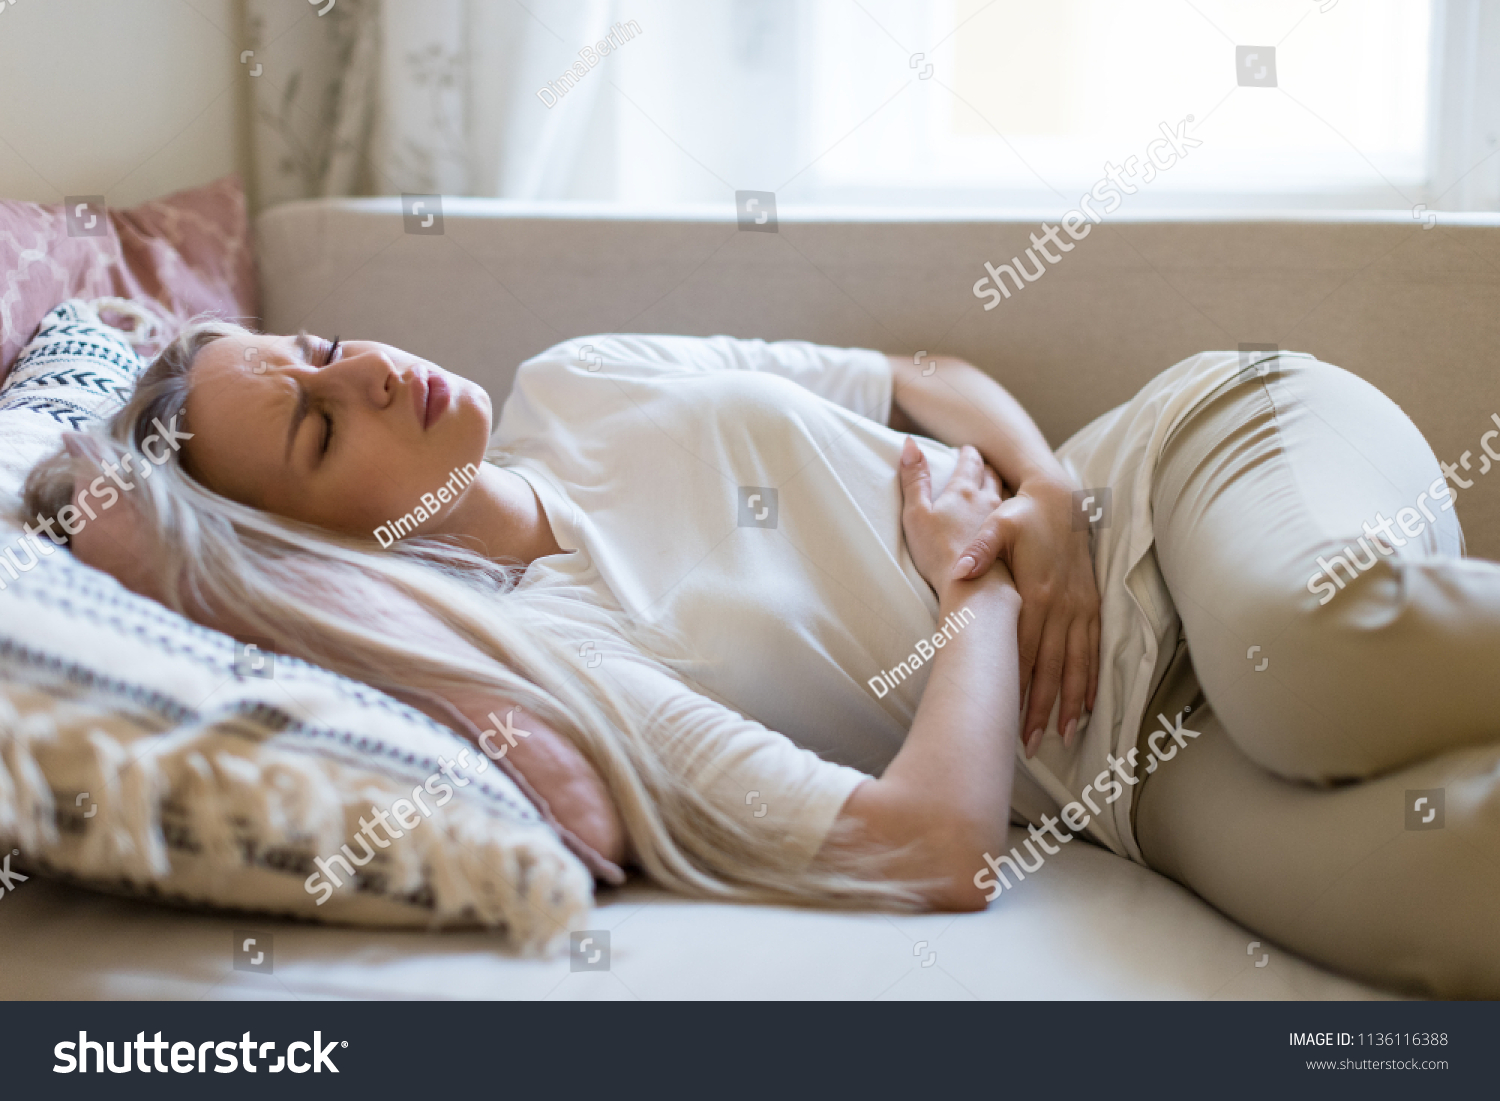 Health issues problems.Young Caucasian woman suffering from stomach pain, feeling abdominal pain or cramps, lying on sofa.Period menstruation, female health problem, aching belly and gynecology #1136116388